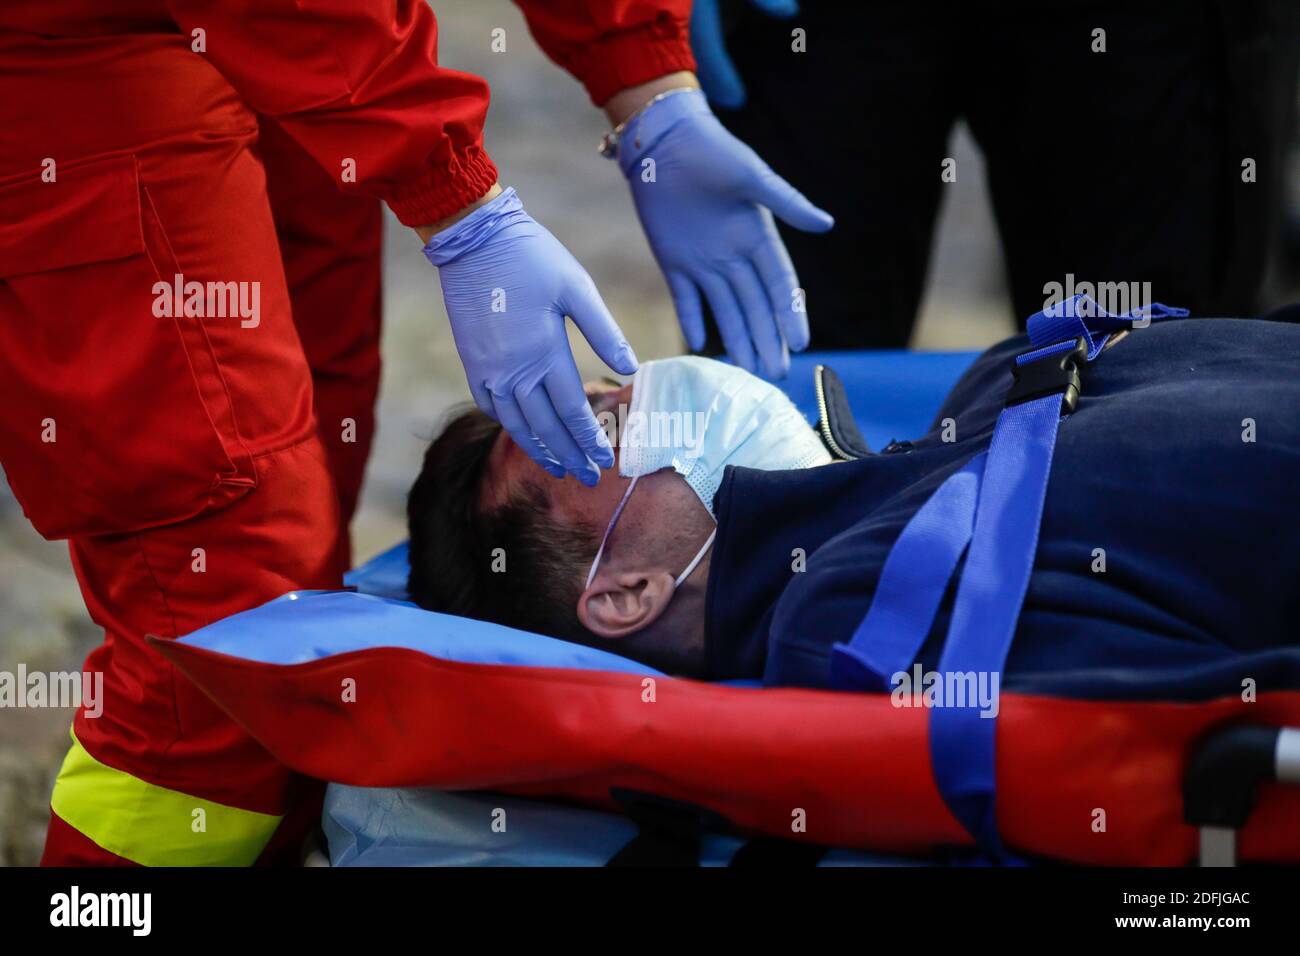 Bucharest, Romania - December 5, 2020: Paramedics from the Romanian Ambulance (SMURD) exercise the rescue of a car crash victim. Stock Photo